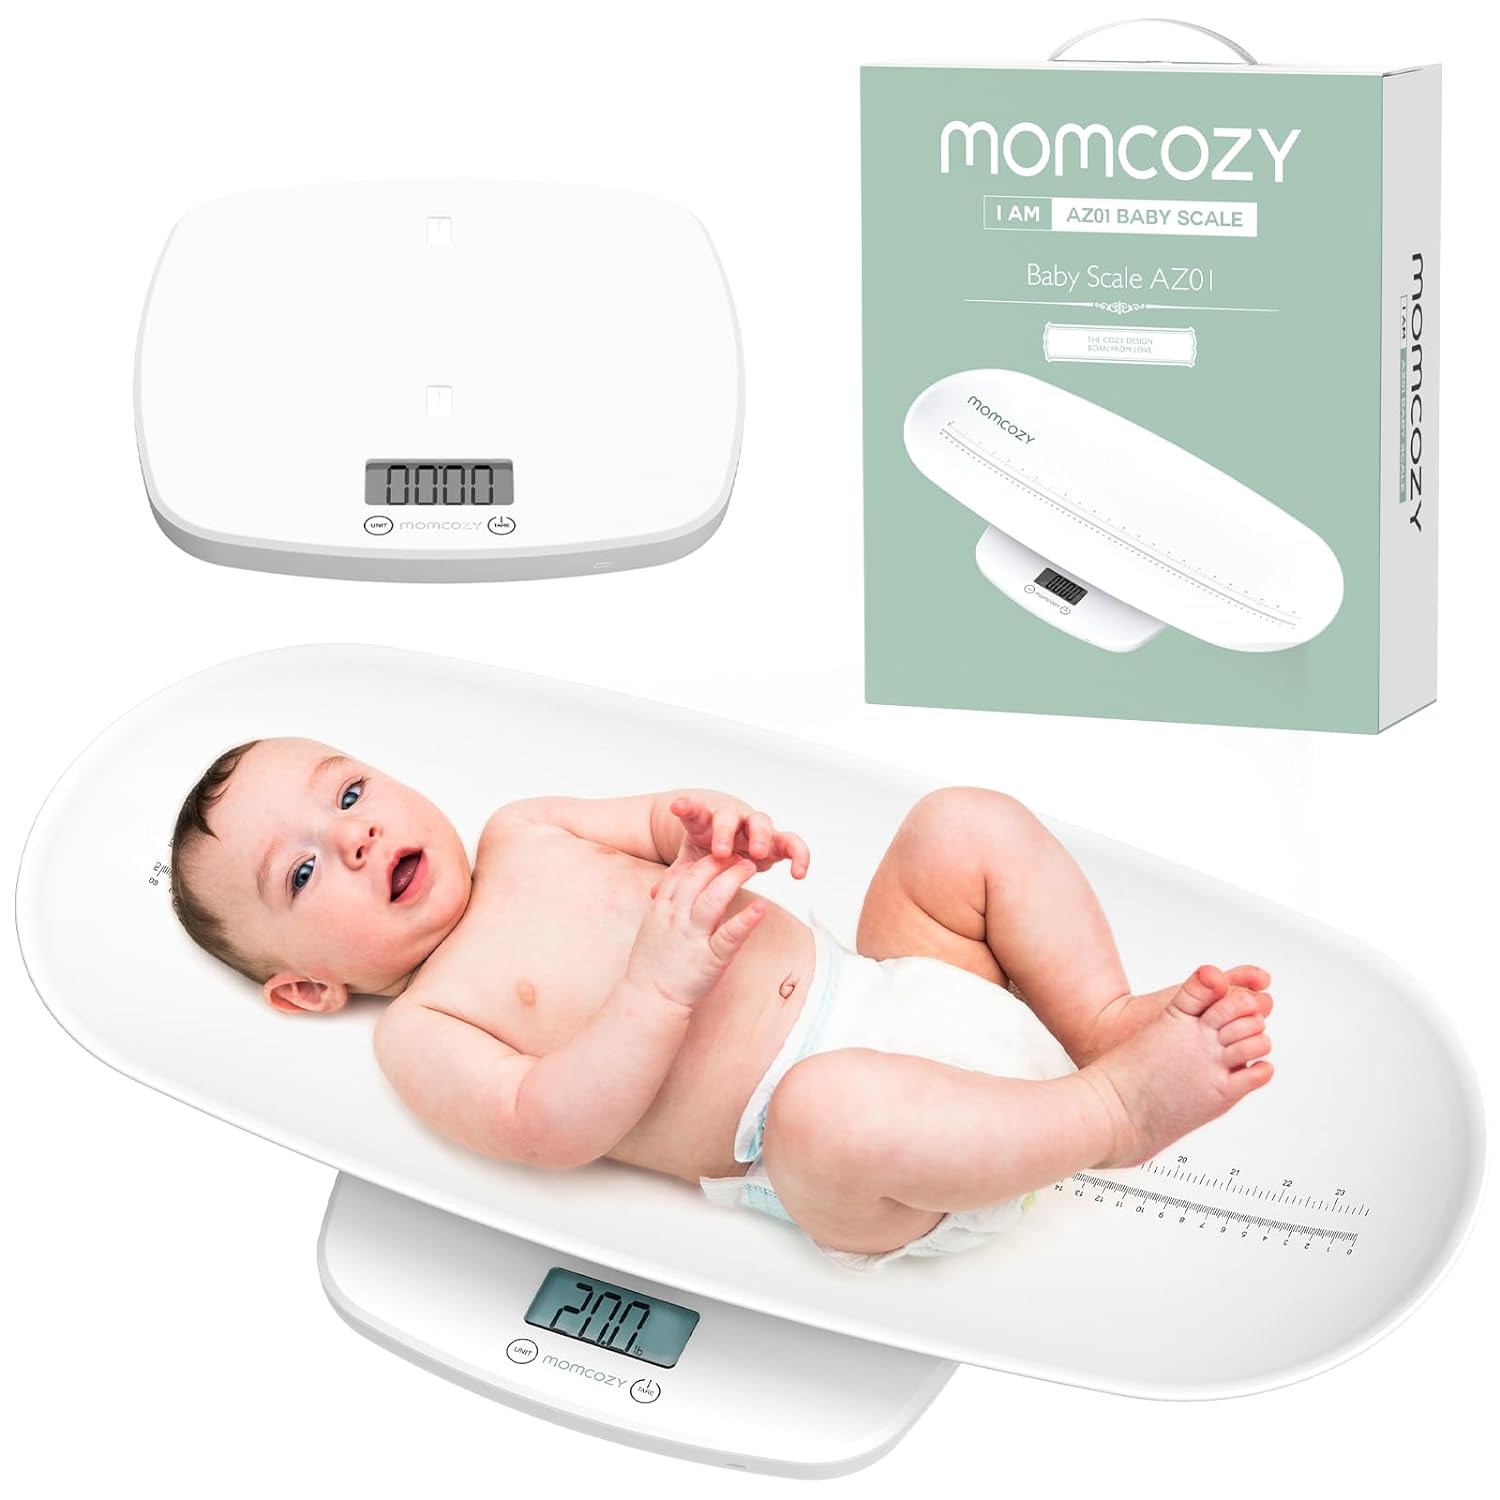 Momcozy Baby Scale, Multi-Function Scale for Toddler, Children, Pet, Adult, Removable Scales for Body Weight & Height Measurement, Perspectives Switch,5 Units,Digital LED Screen,Auto-Off, Up to 330lb